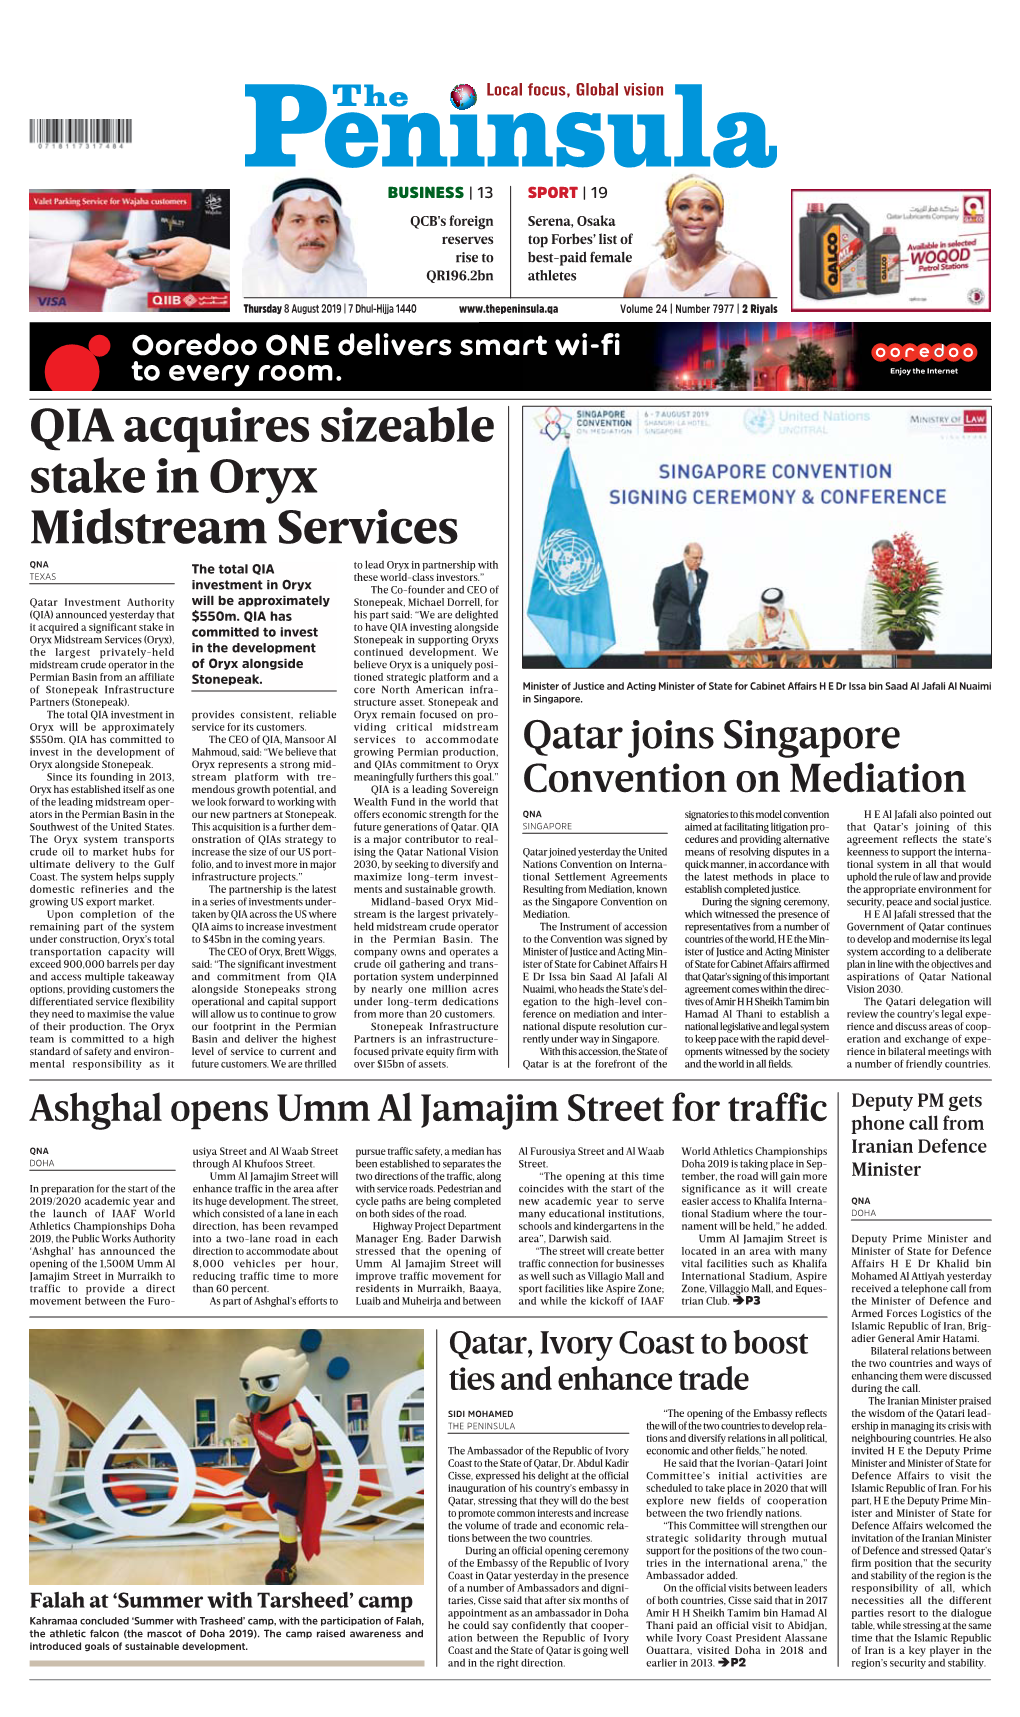 QIA Acquires Sizeable Stake in Oryx Midstream Services